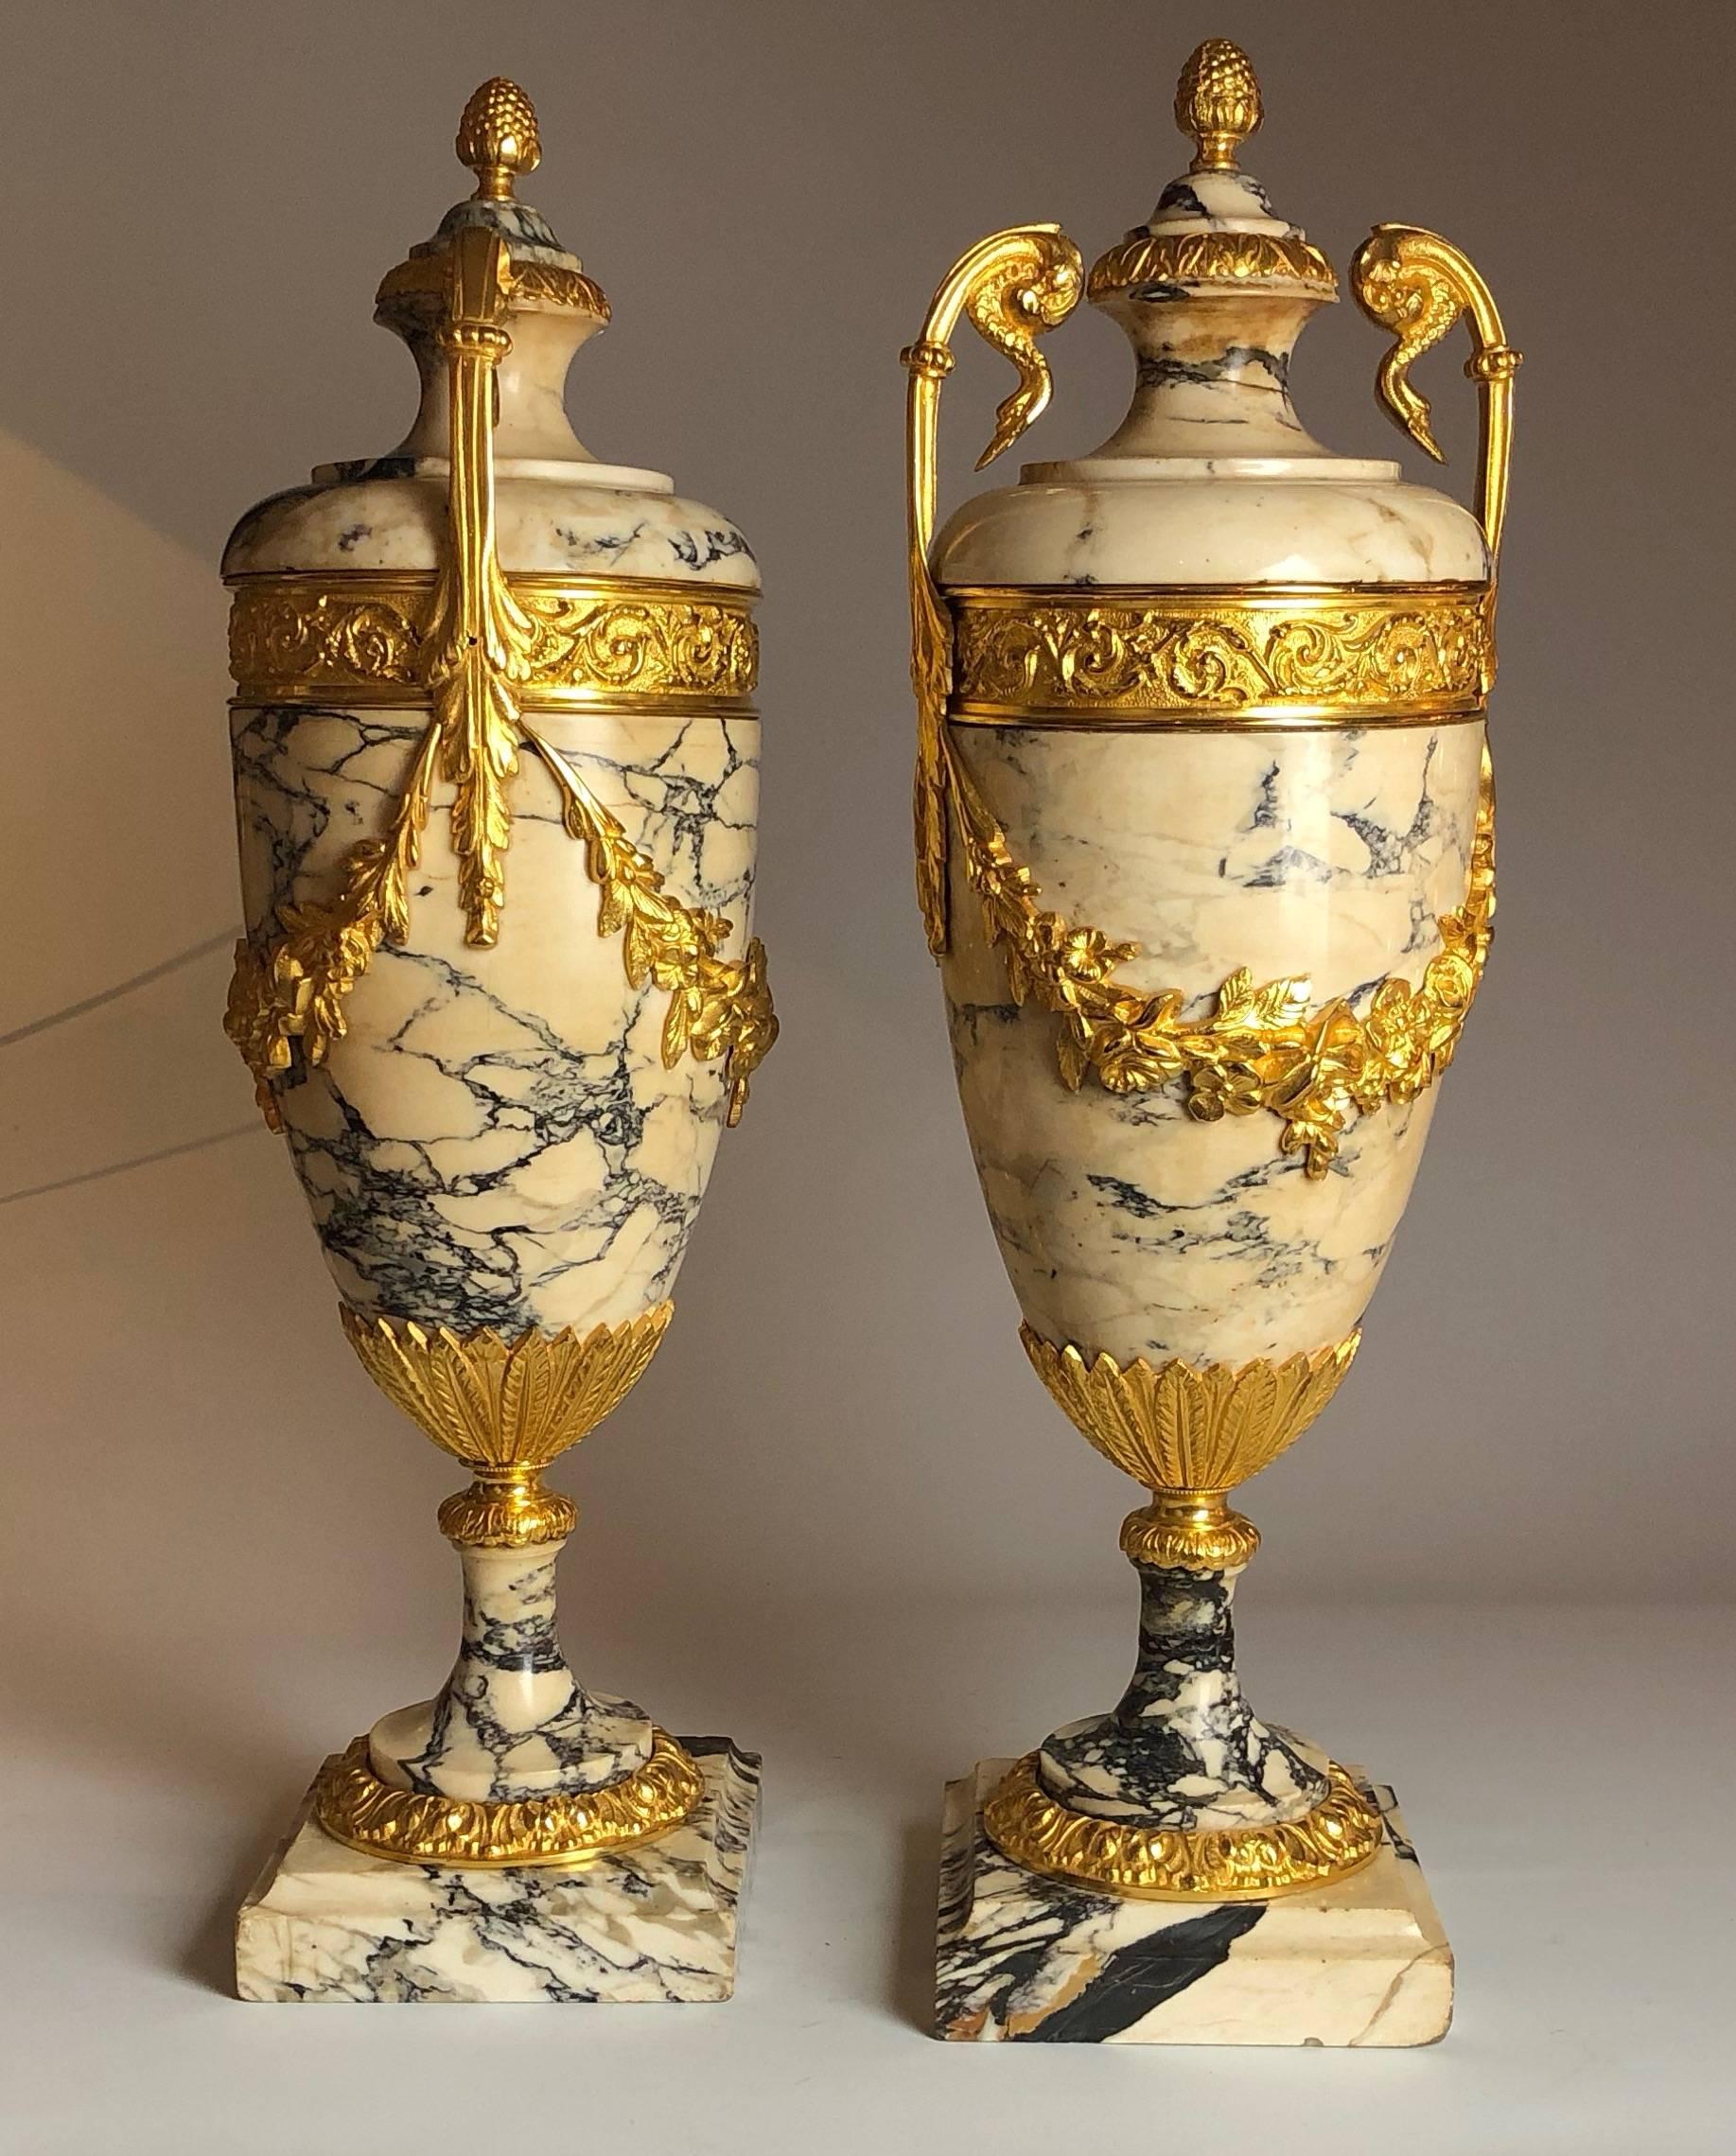 A fantastic pair of ormolu-mounted marble Urns, of the highest quality. 

French, circa 1870.

Measure: They stand 21